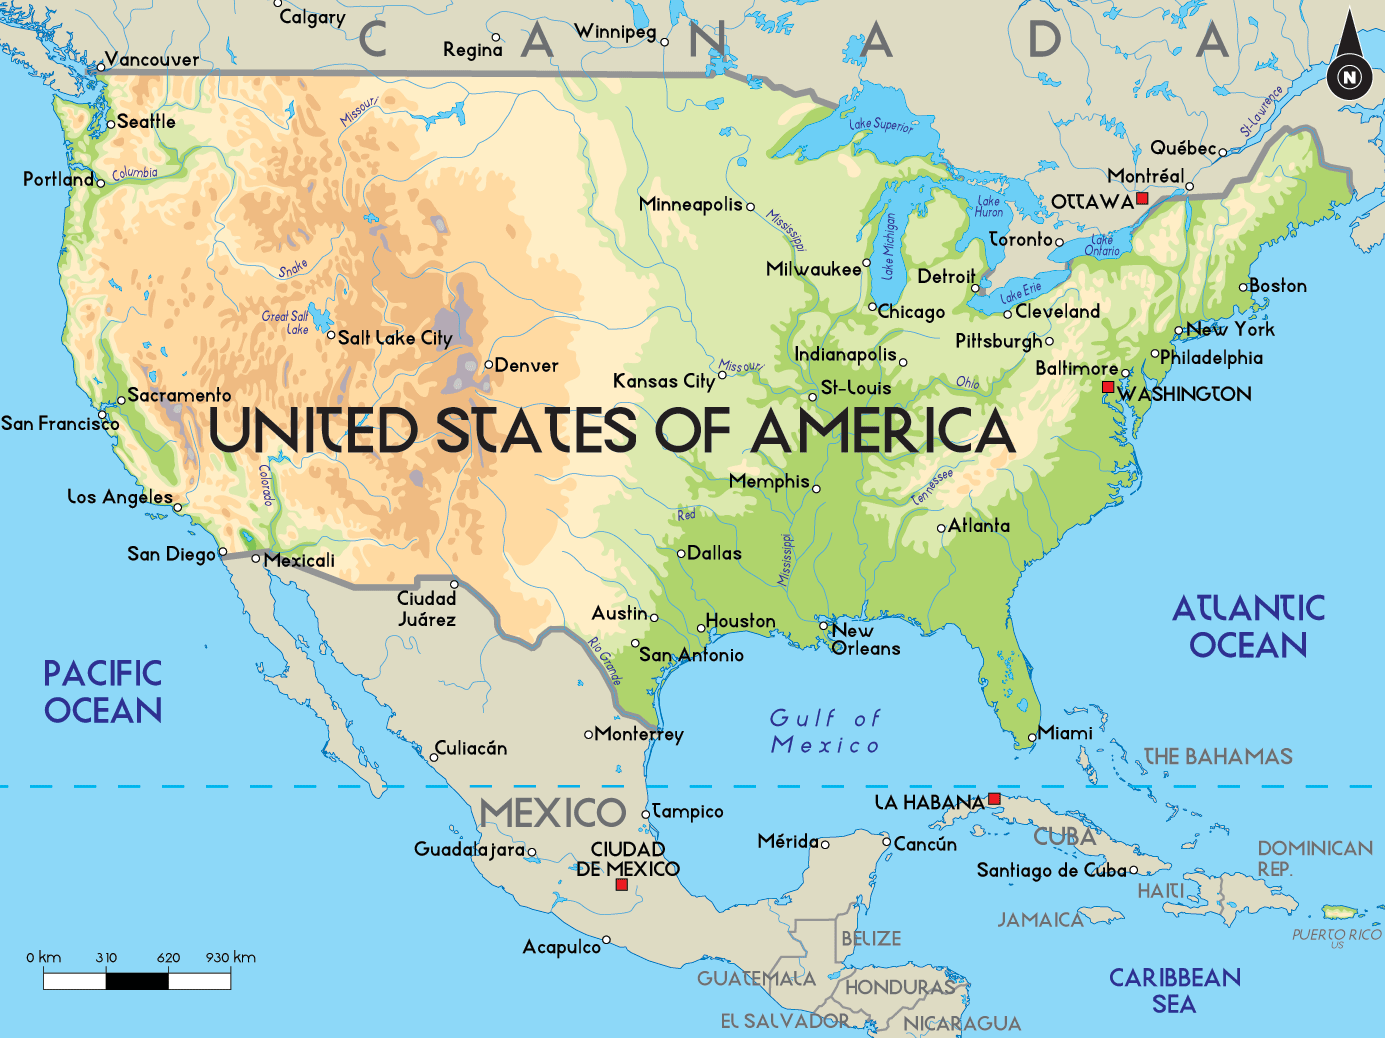 United States of America Physical Maps